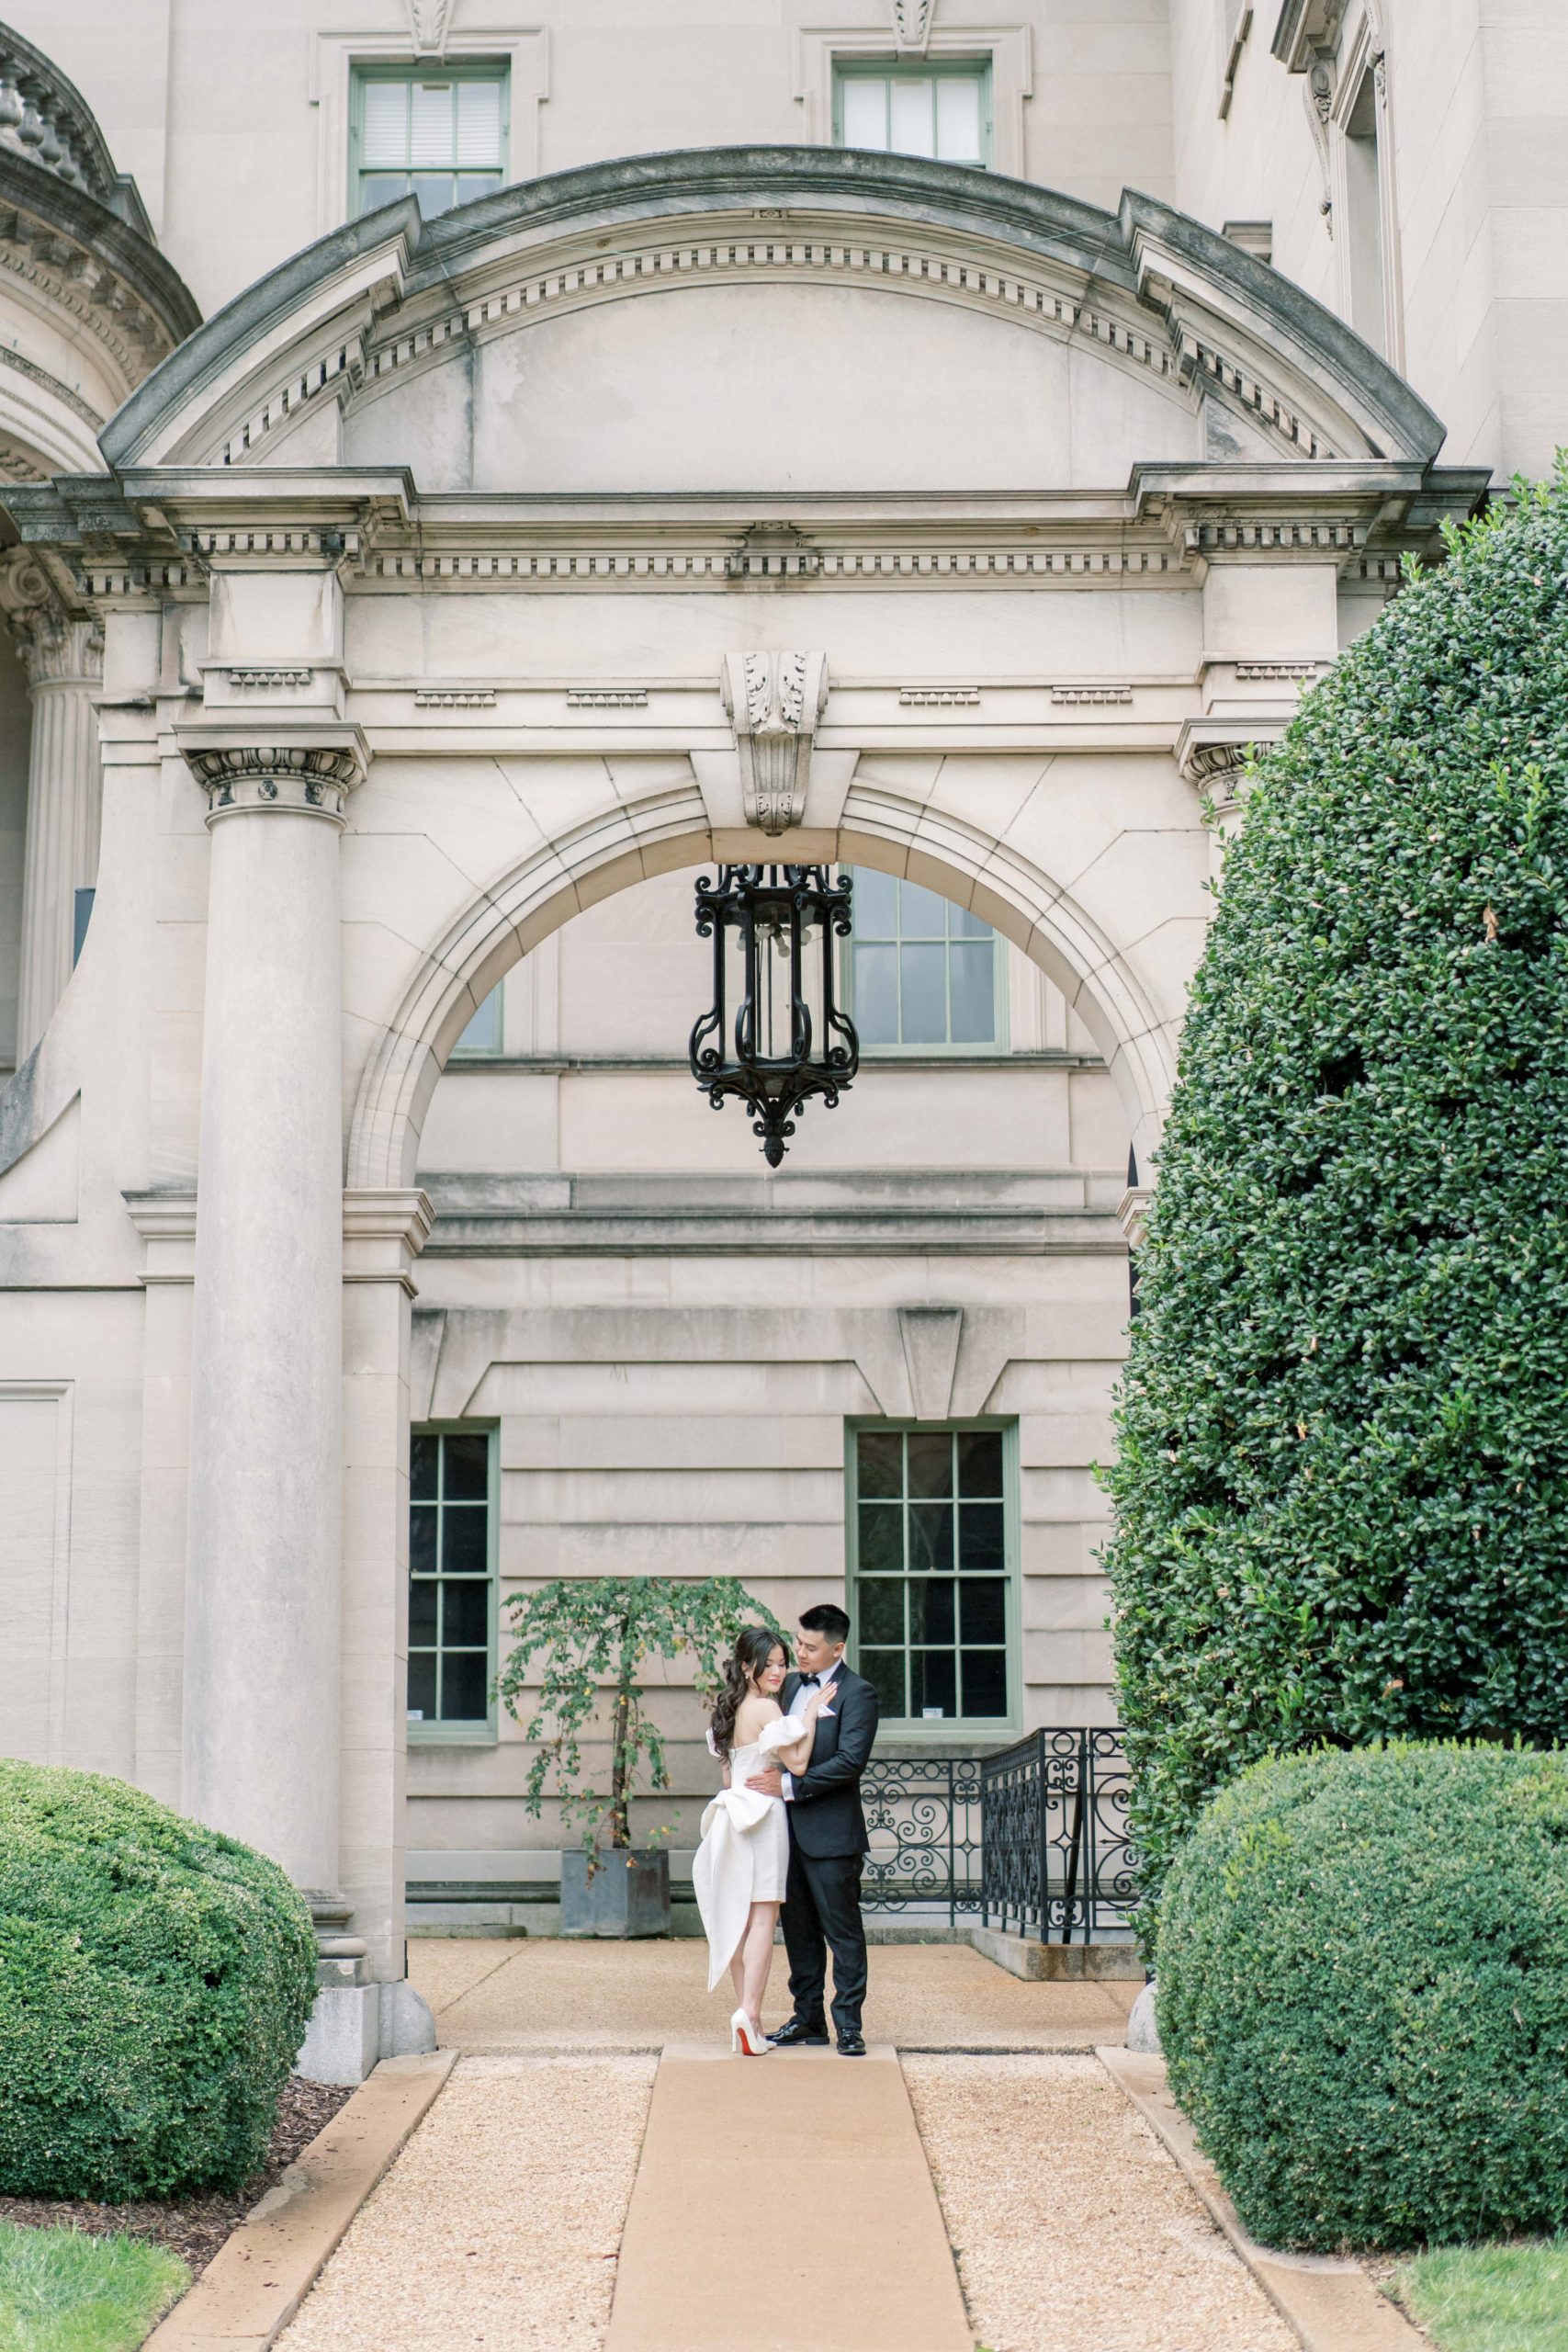 An elegant engagement session at the historic Anderson House in Washington, DC.